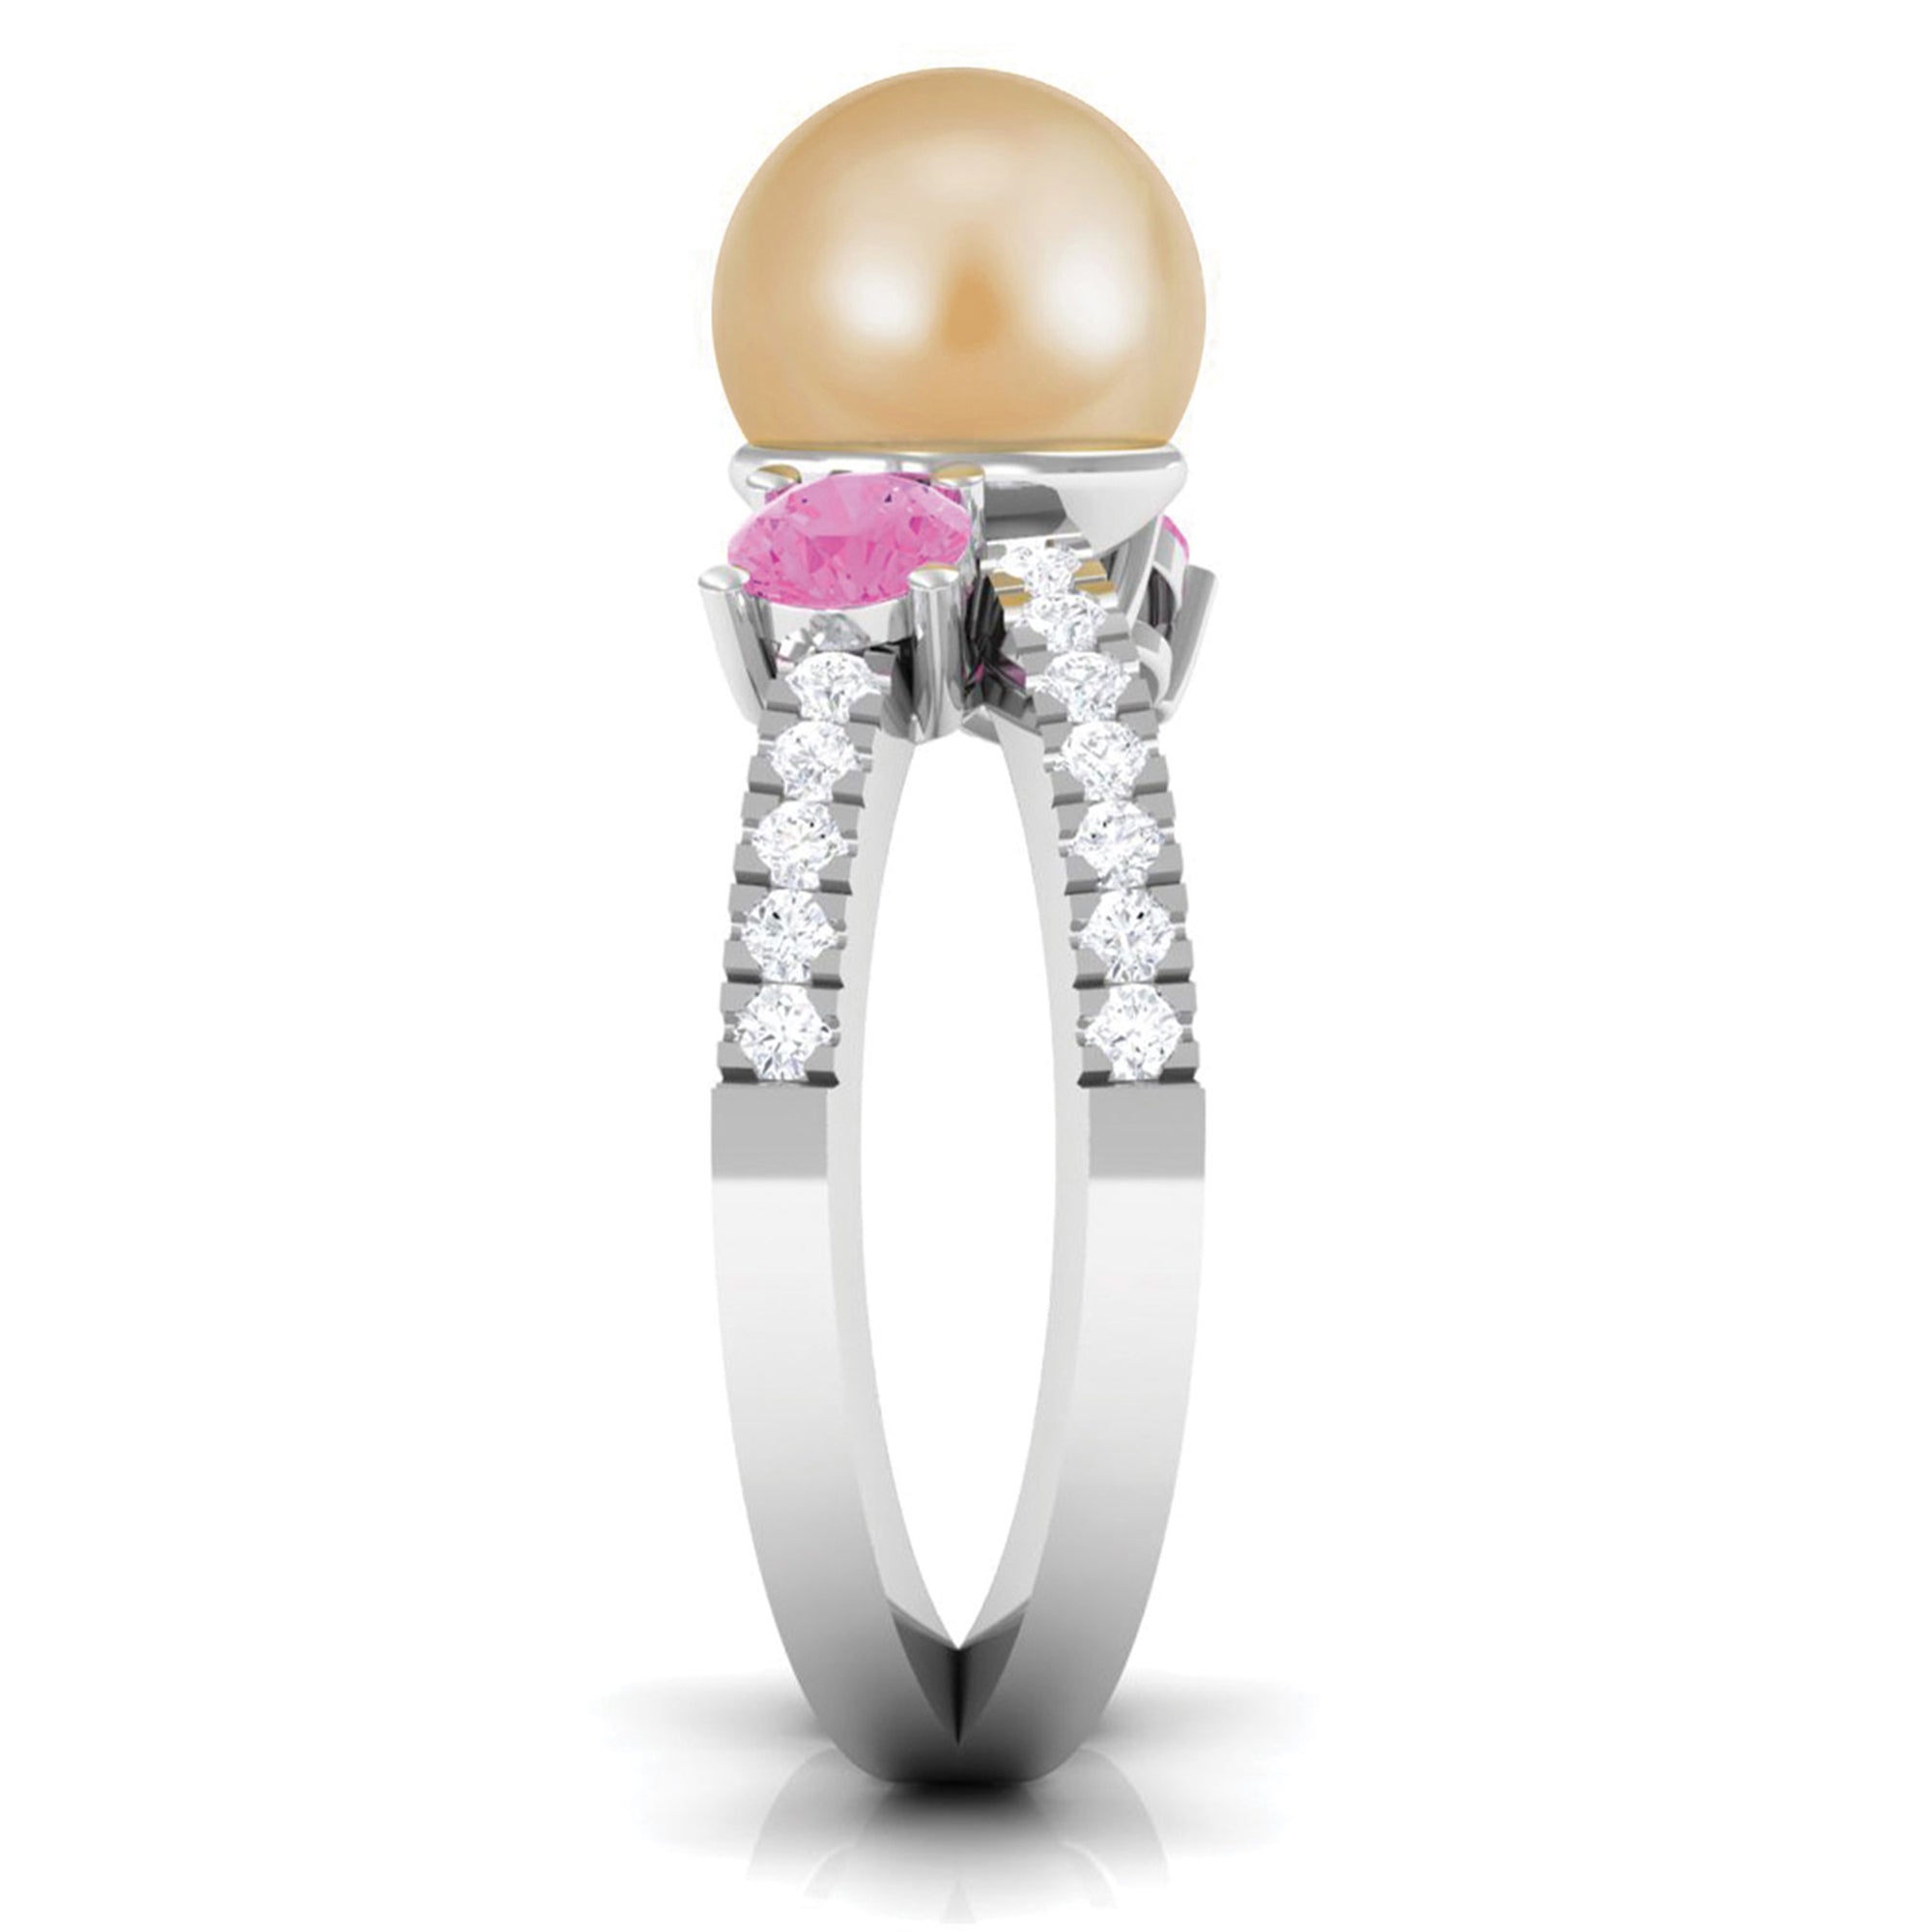 Golden Pearl Solitaire Crossover Ring with Pink Sapphire and Diamond South Sea Pearl-AAAA Quality - Arisha Jewels